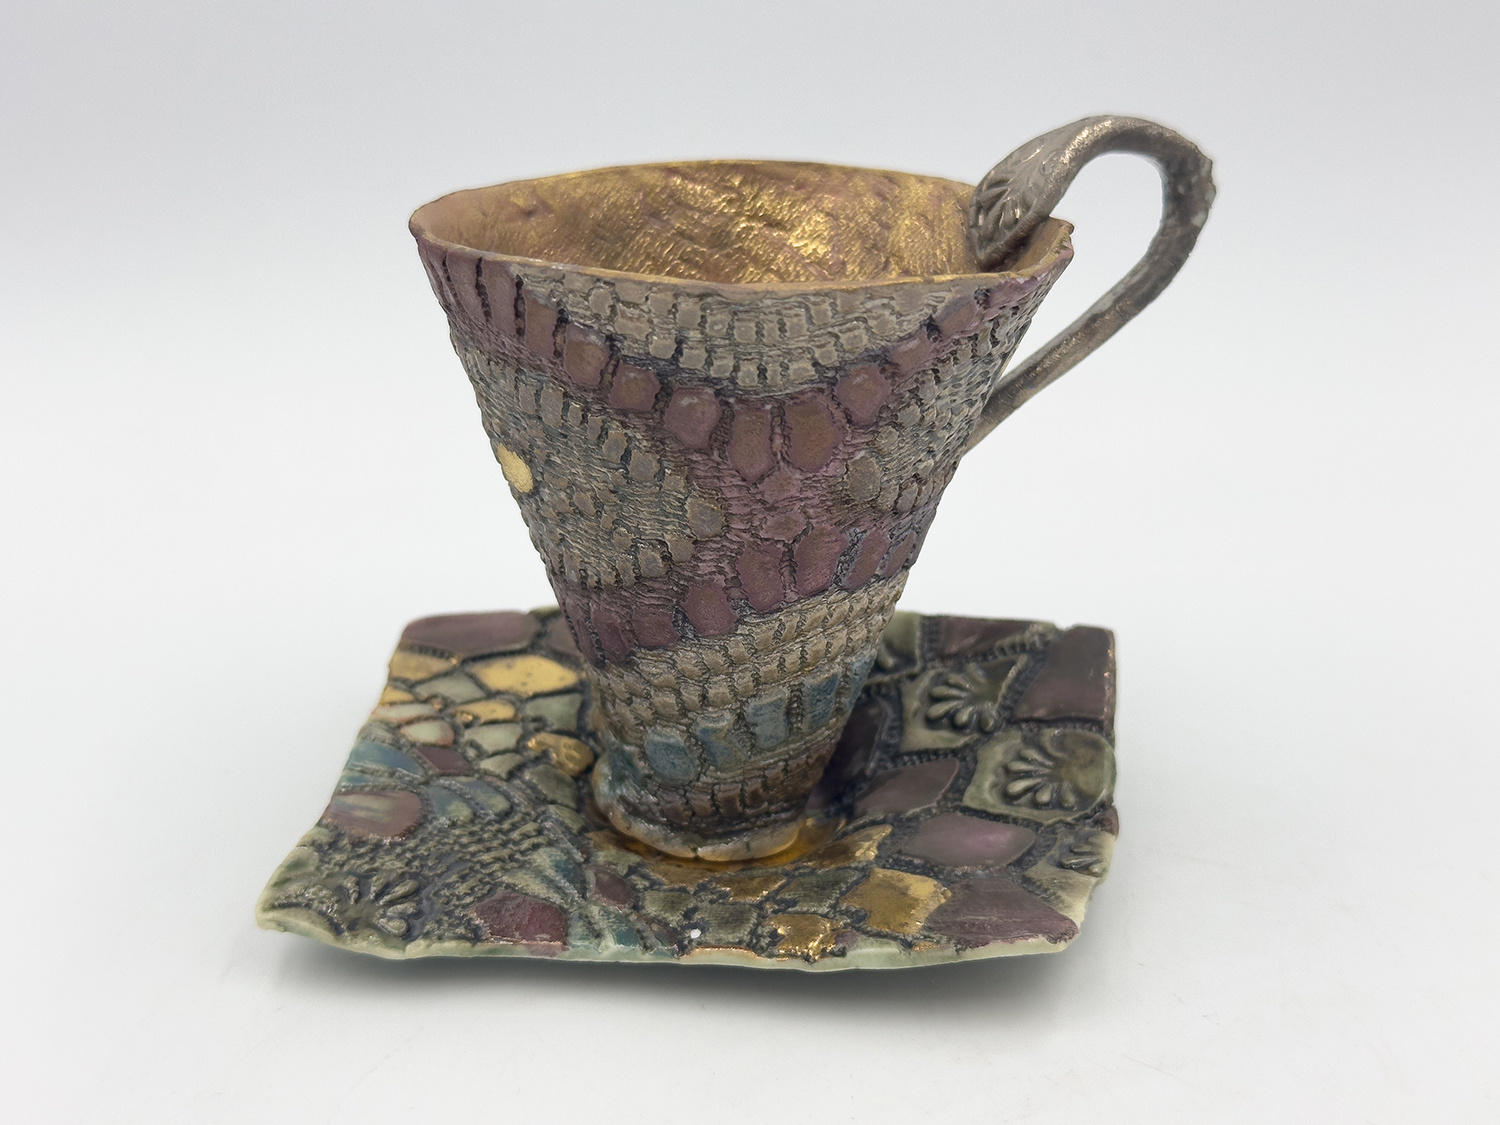 Cup & Saucer by Pam Schomberg